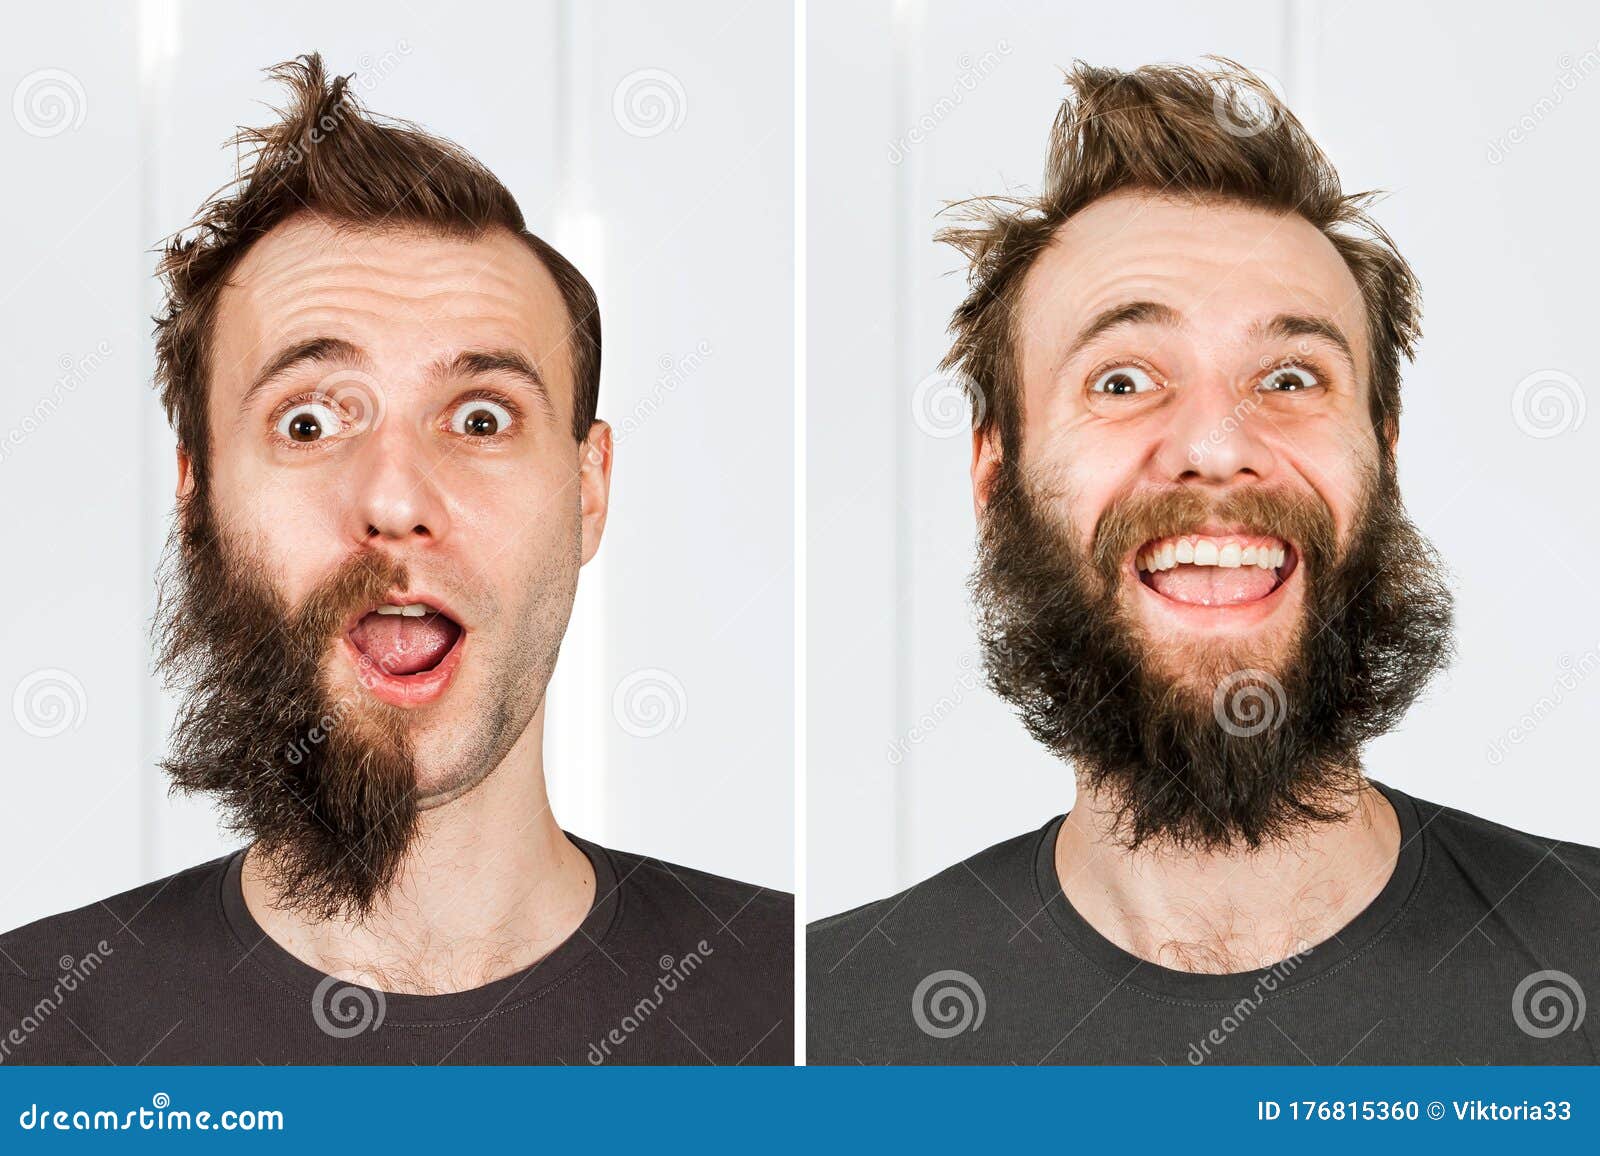 Happy Guy With Half Beard And Without Hair Loss Man Before And After Shave Or Transplant Haircut Set Transformation Stock Photo Image Of Head Loss